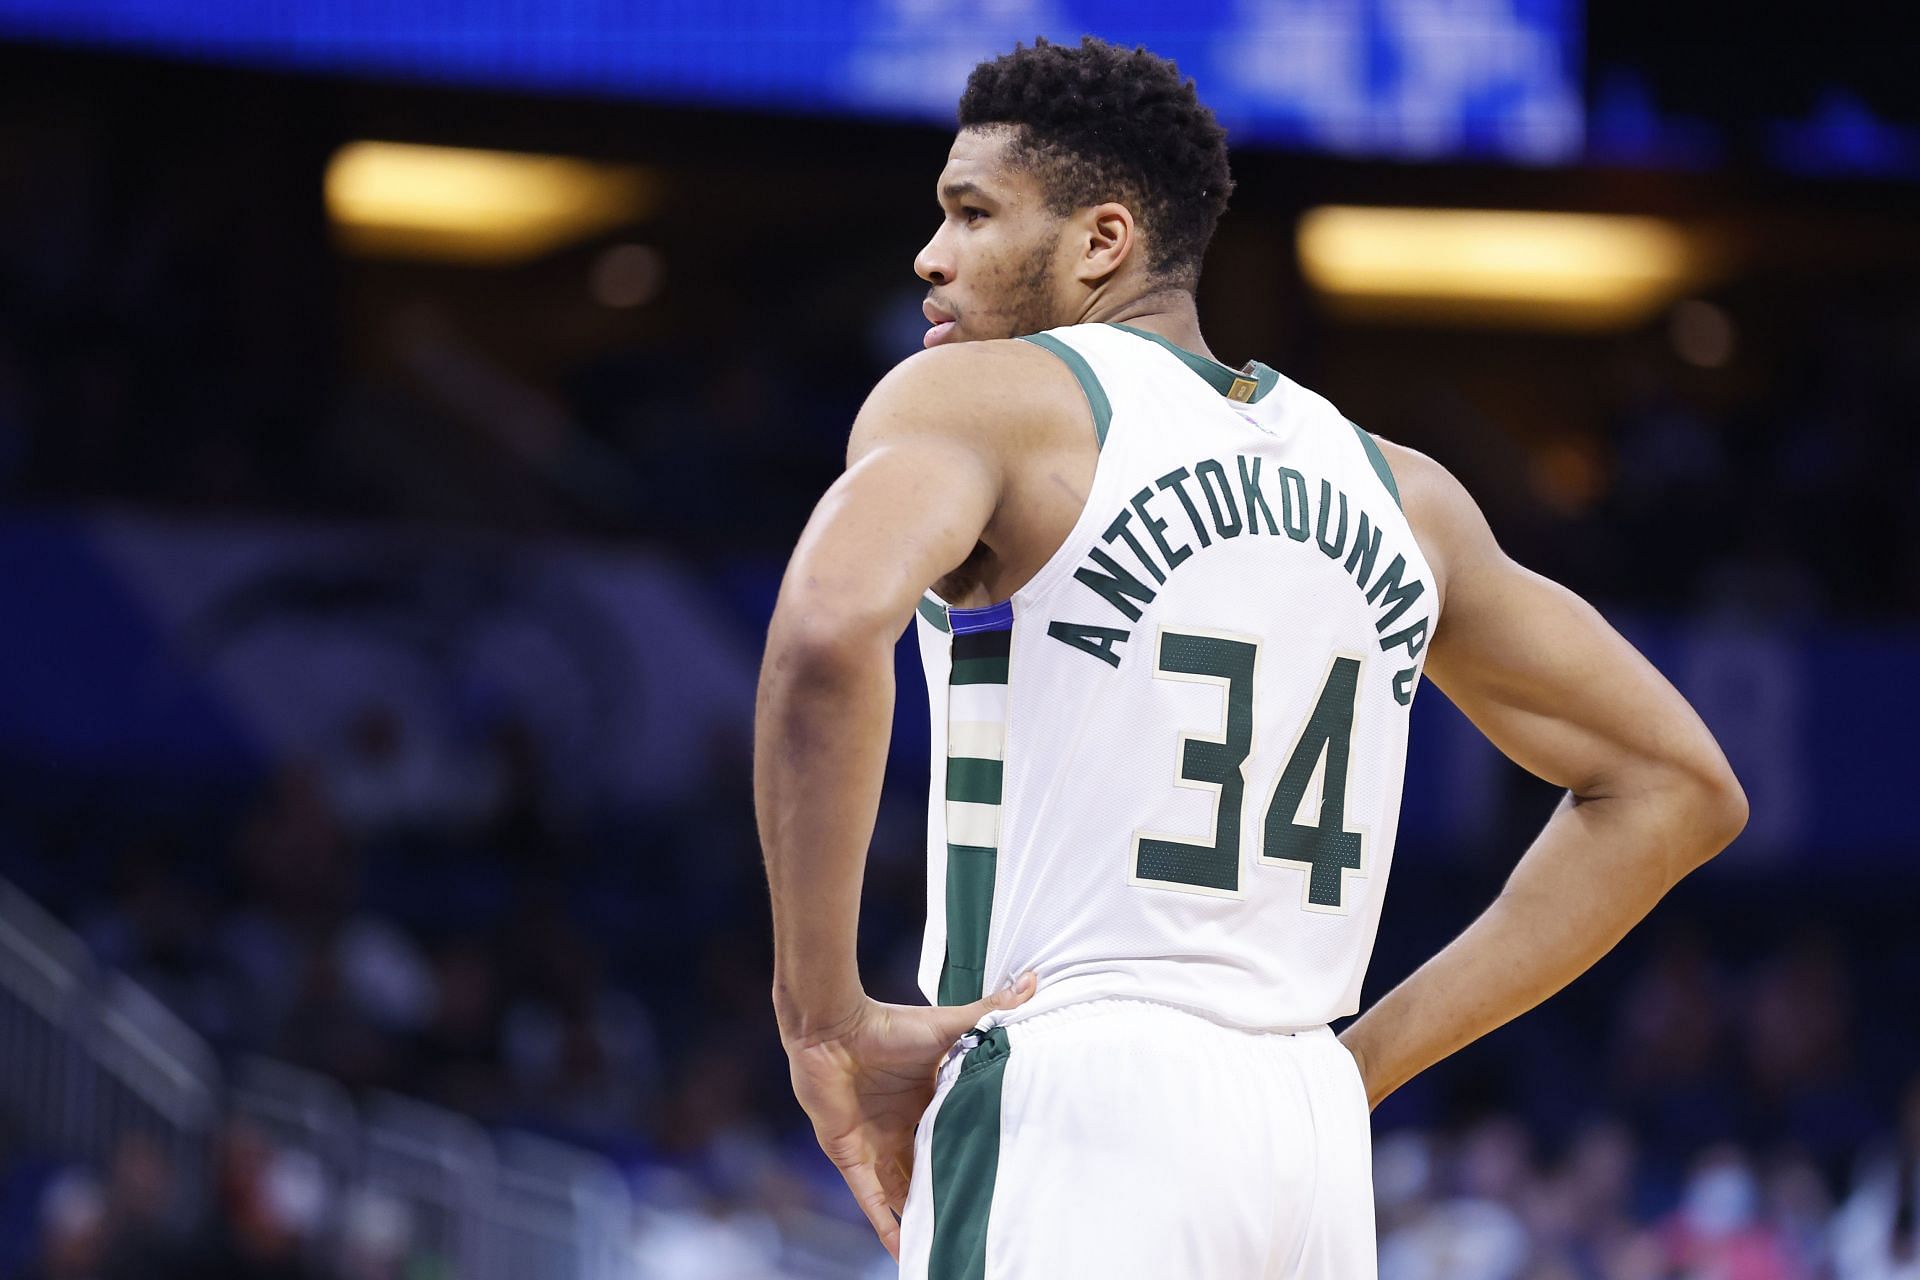 Milwaukee Bucks forward Giannis Antetokounmpo continues his march for Defensive Player of the Year.